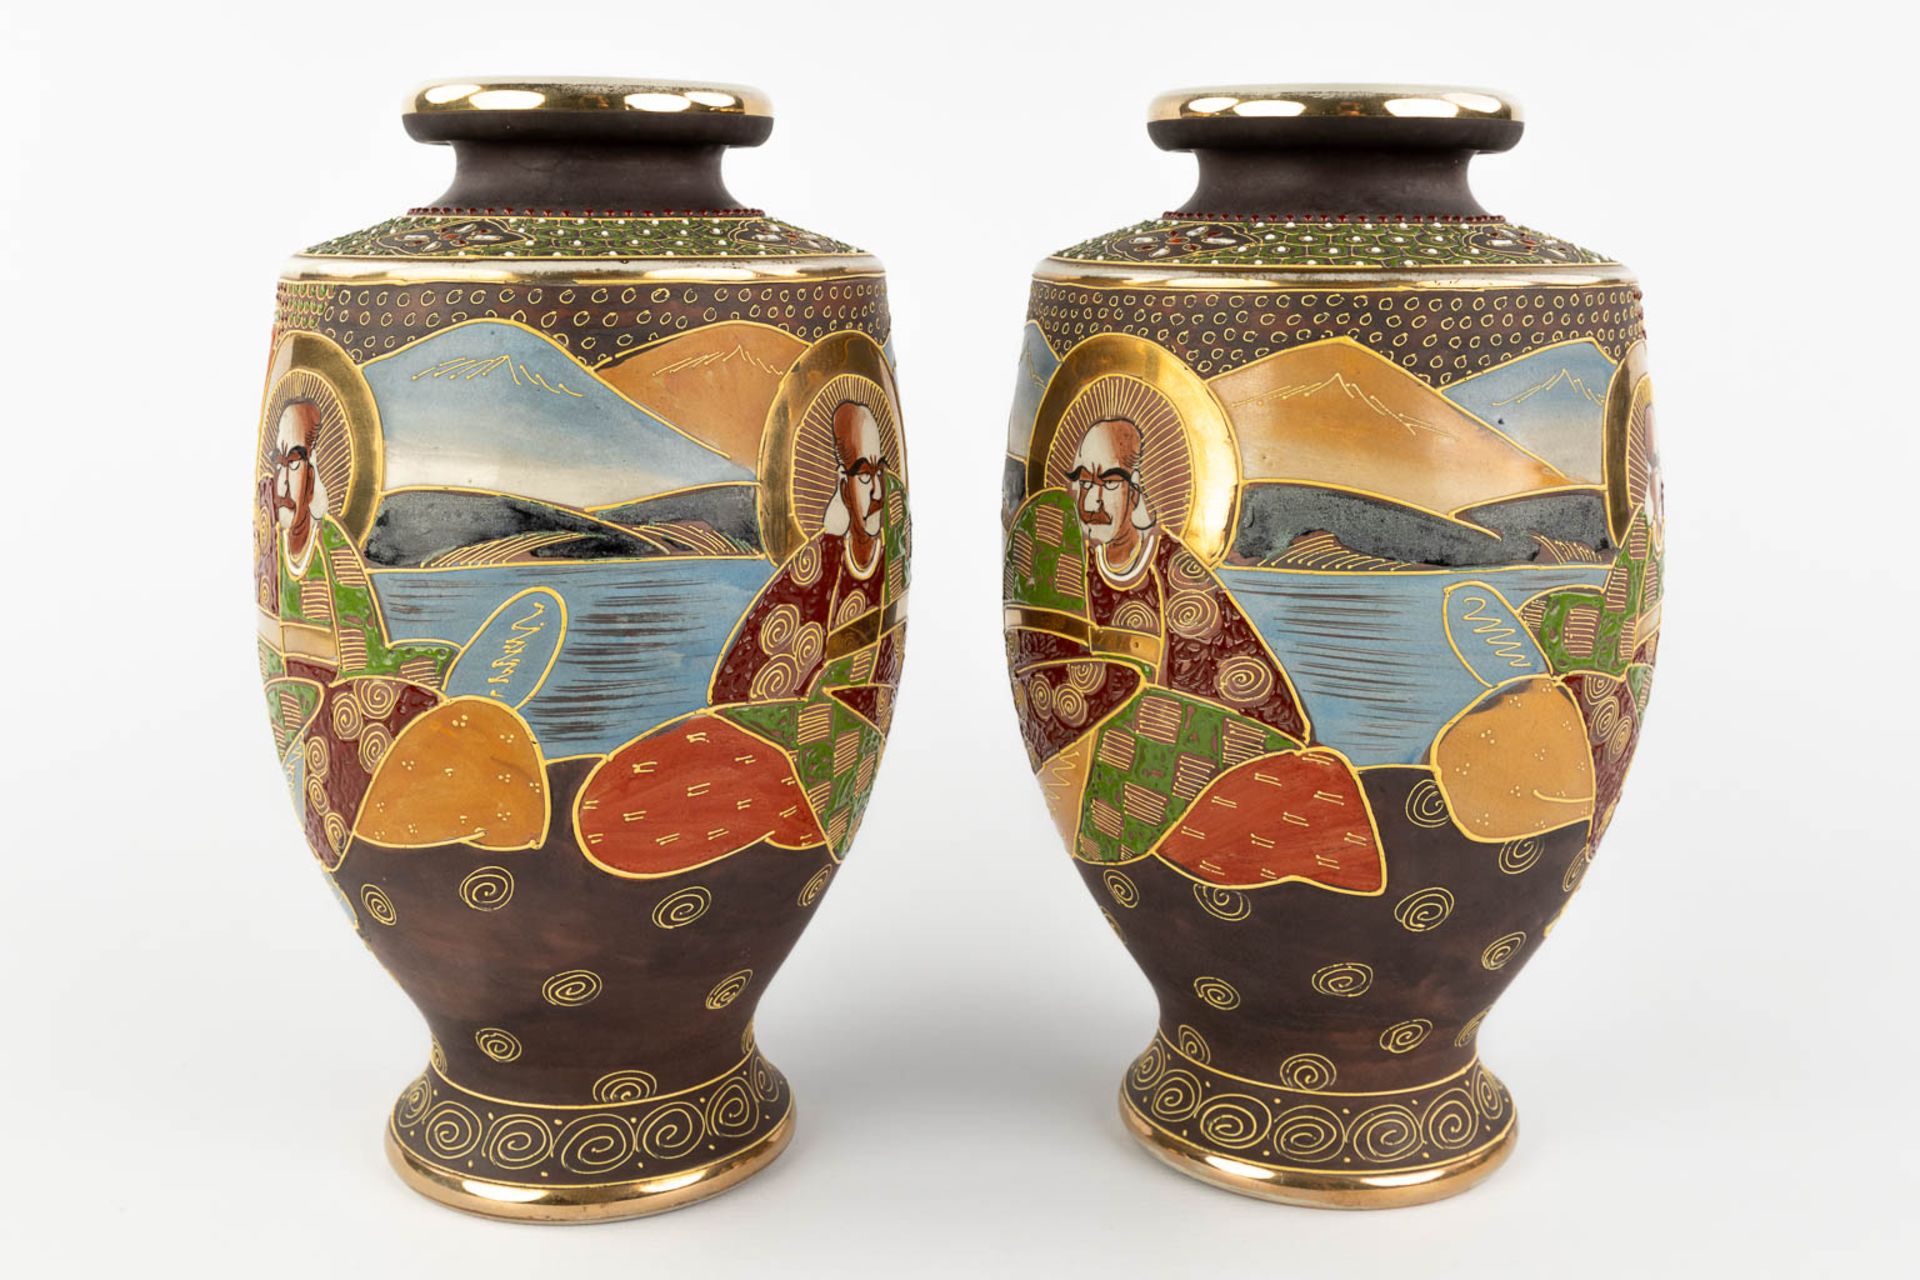 A pair of vases, a vase and jar with lid, Satsuma faience, Japan. 20th C. (H:31 x D:19 cm) - Image 9 of 19